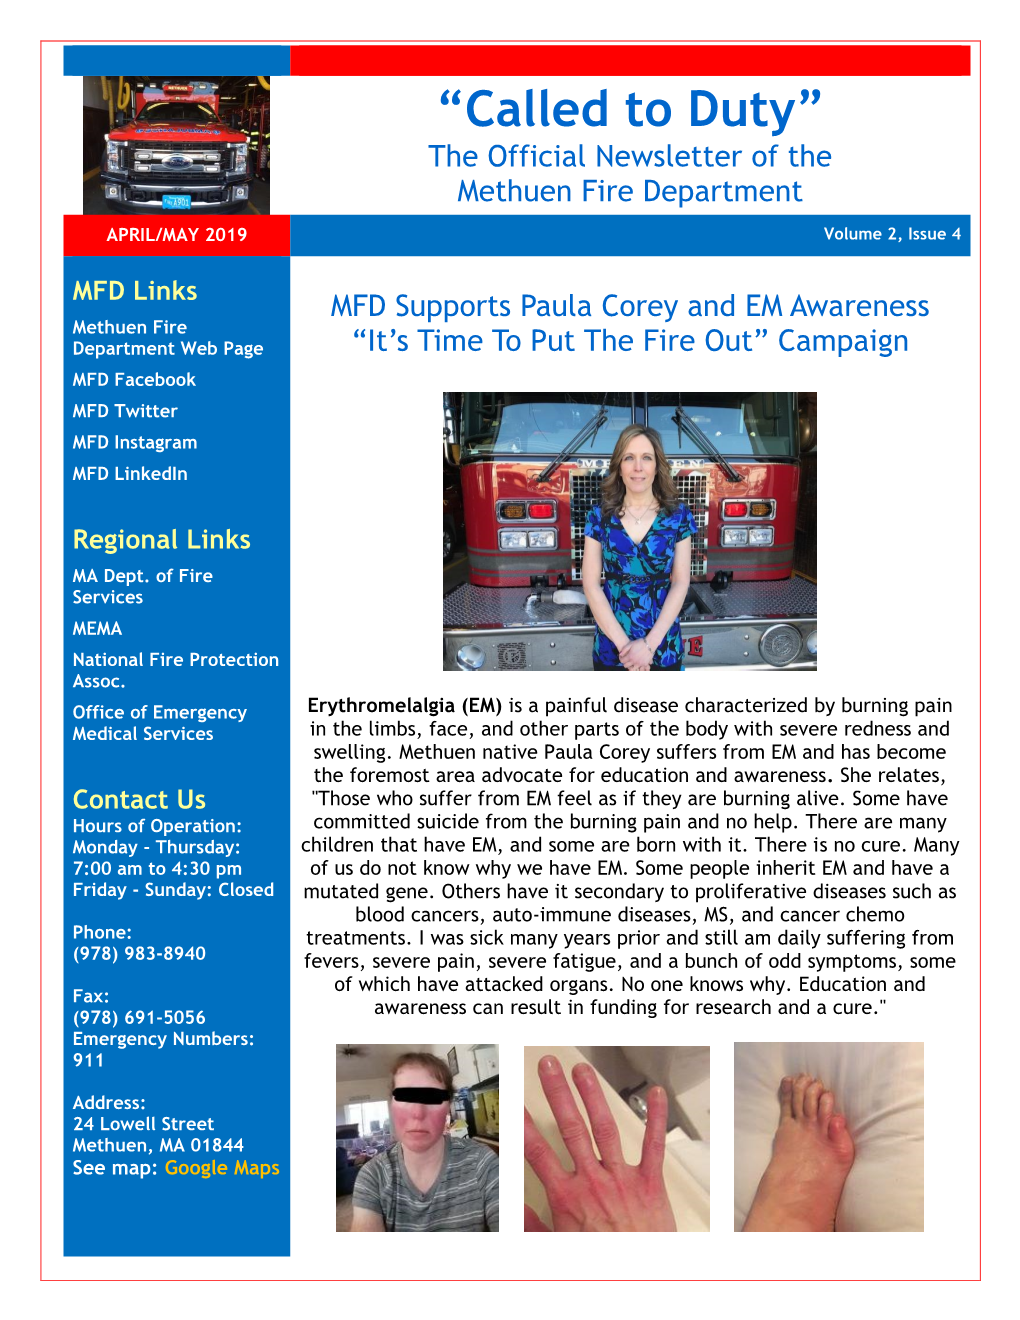 “Called to Duty” the Official Newsletter of the Methuen Fire Department APRIL/MAY 2019 Volume 2, Issue 4